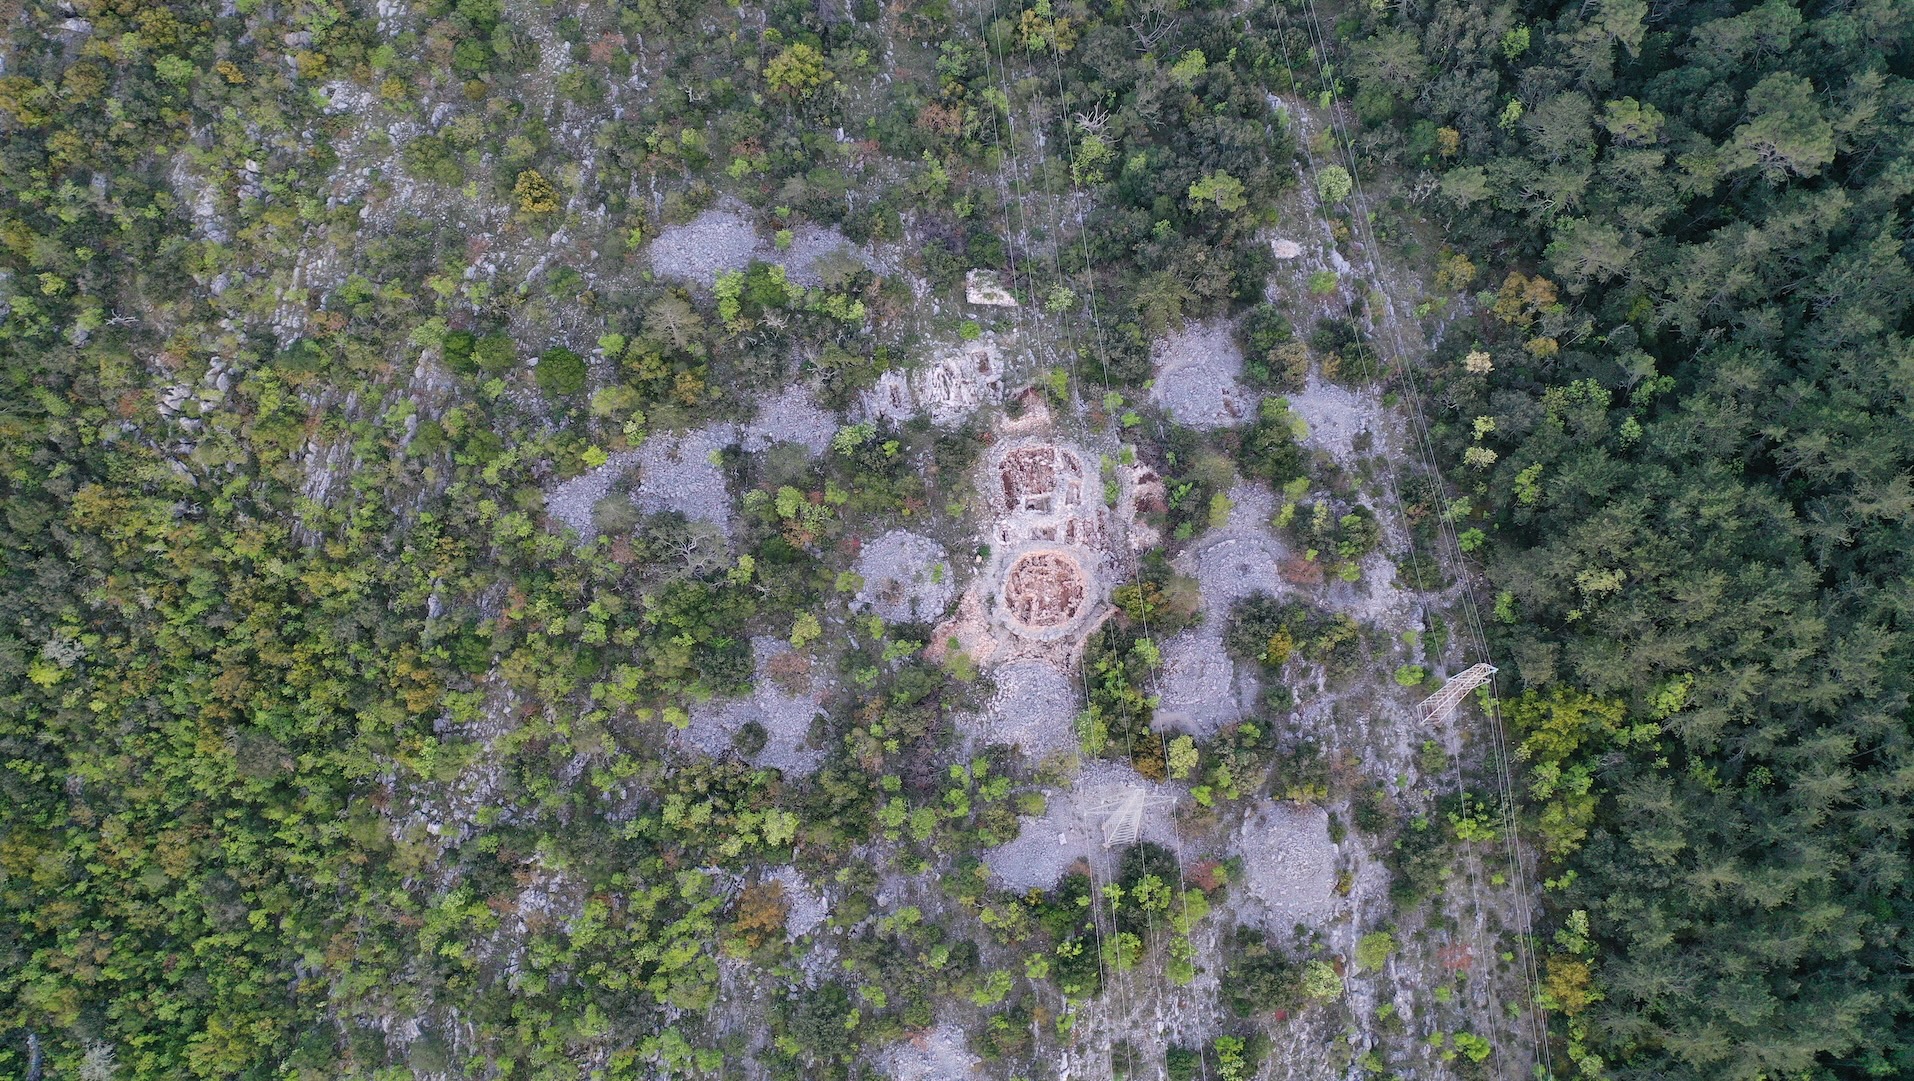 An aerial view of the Hill Cemetery in Croatia.  We see a lot of trees and some bare stone patches.